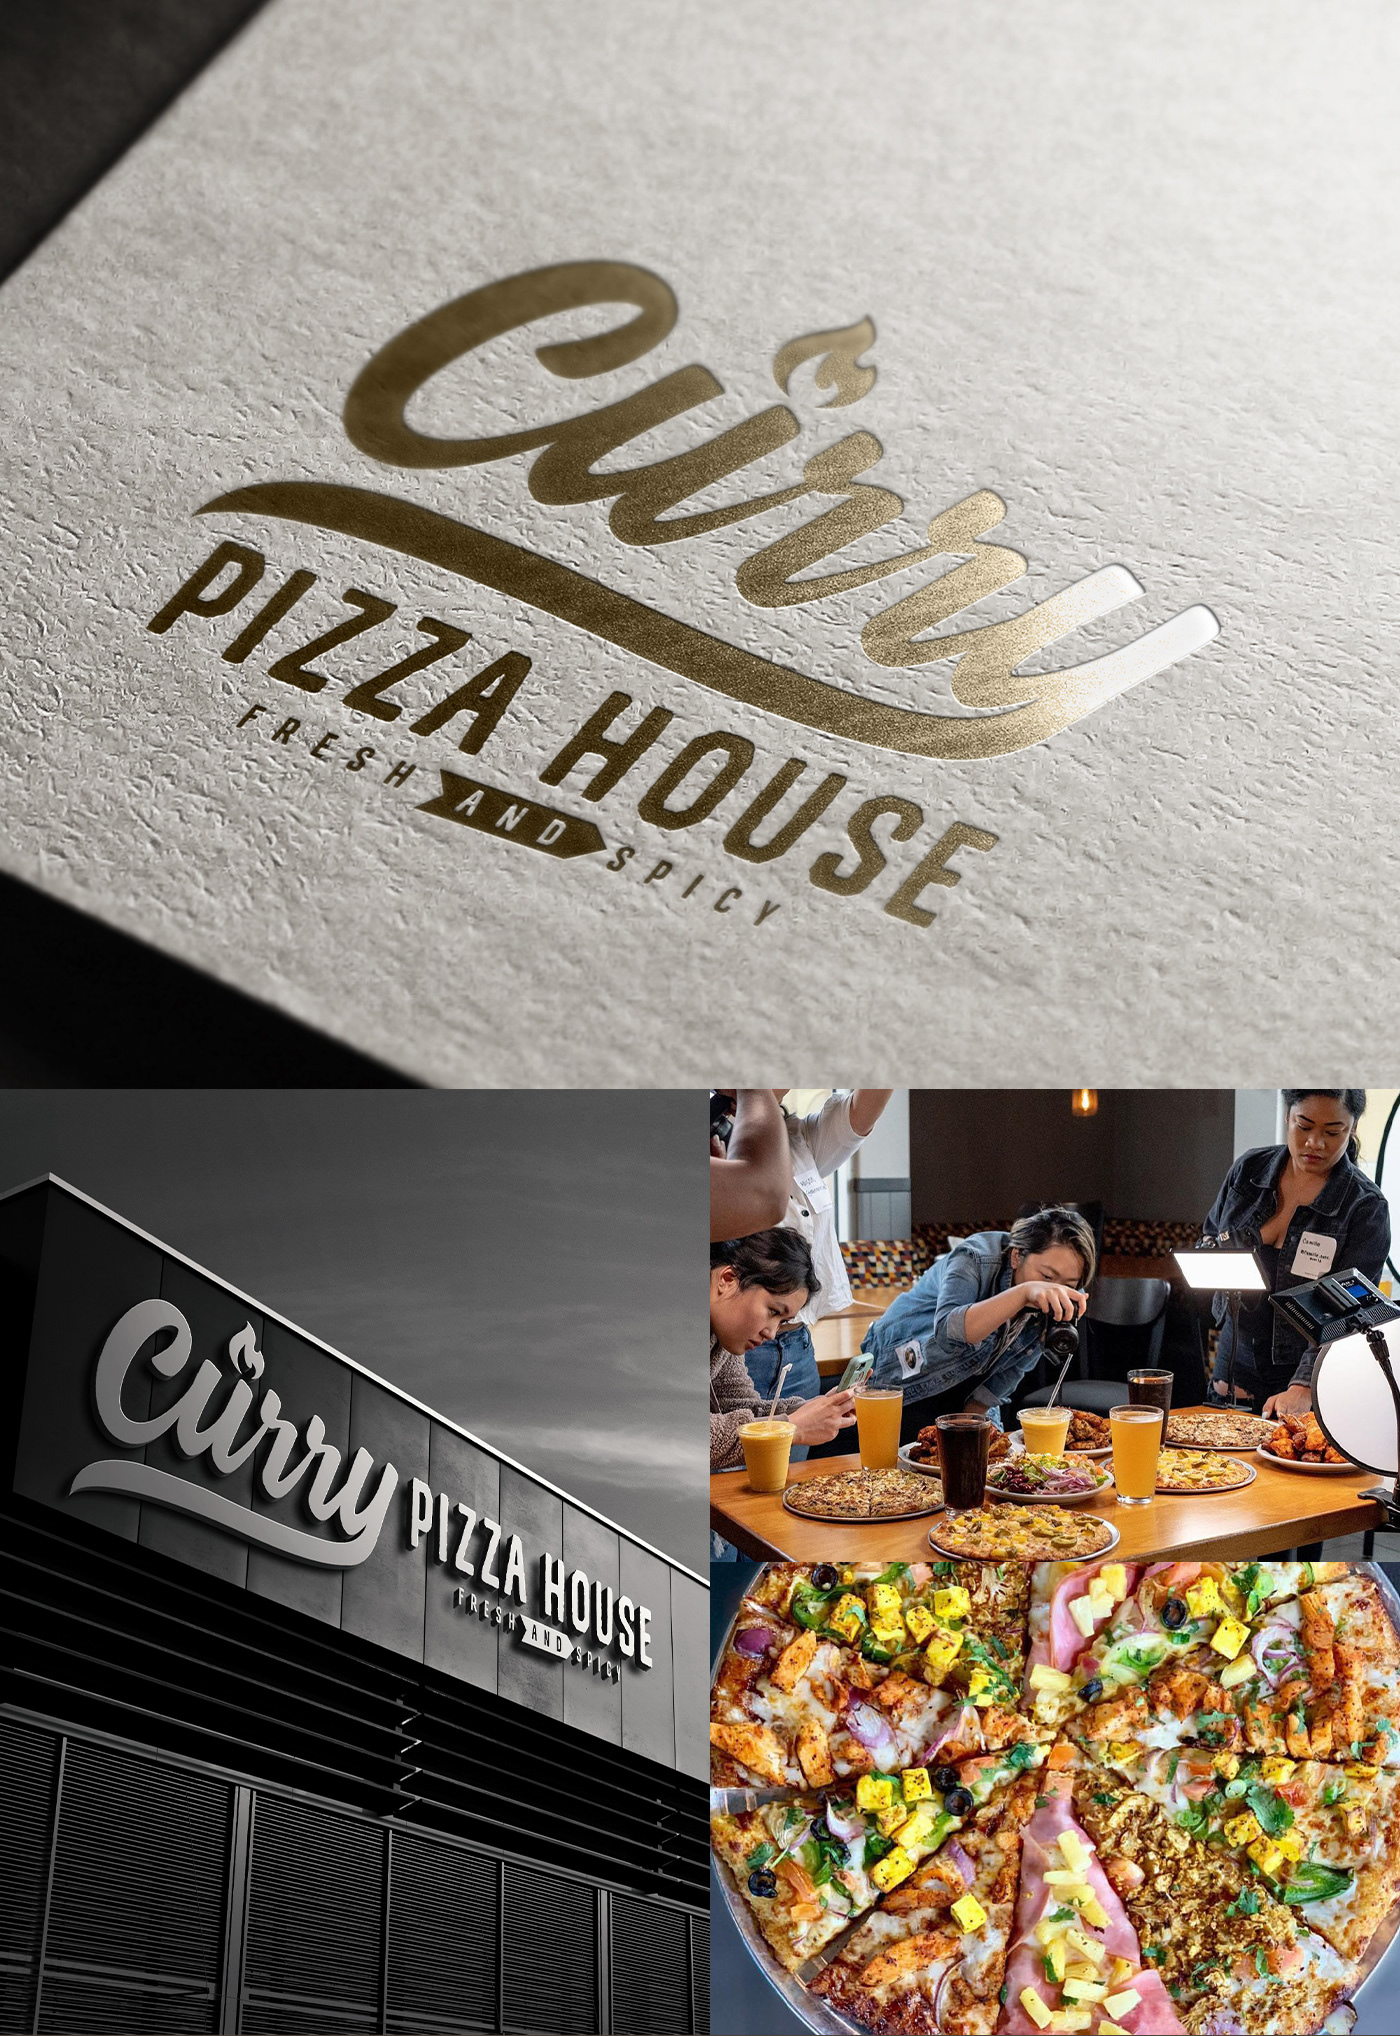 Currypizzahouse curry pizza curry pizza house branding  pizza branding Restaurant Branding italian restaurant Italian fusion pizza pizza typography pizza logo